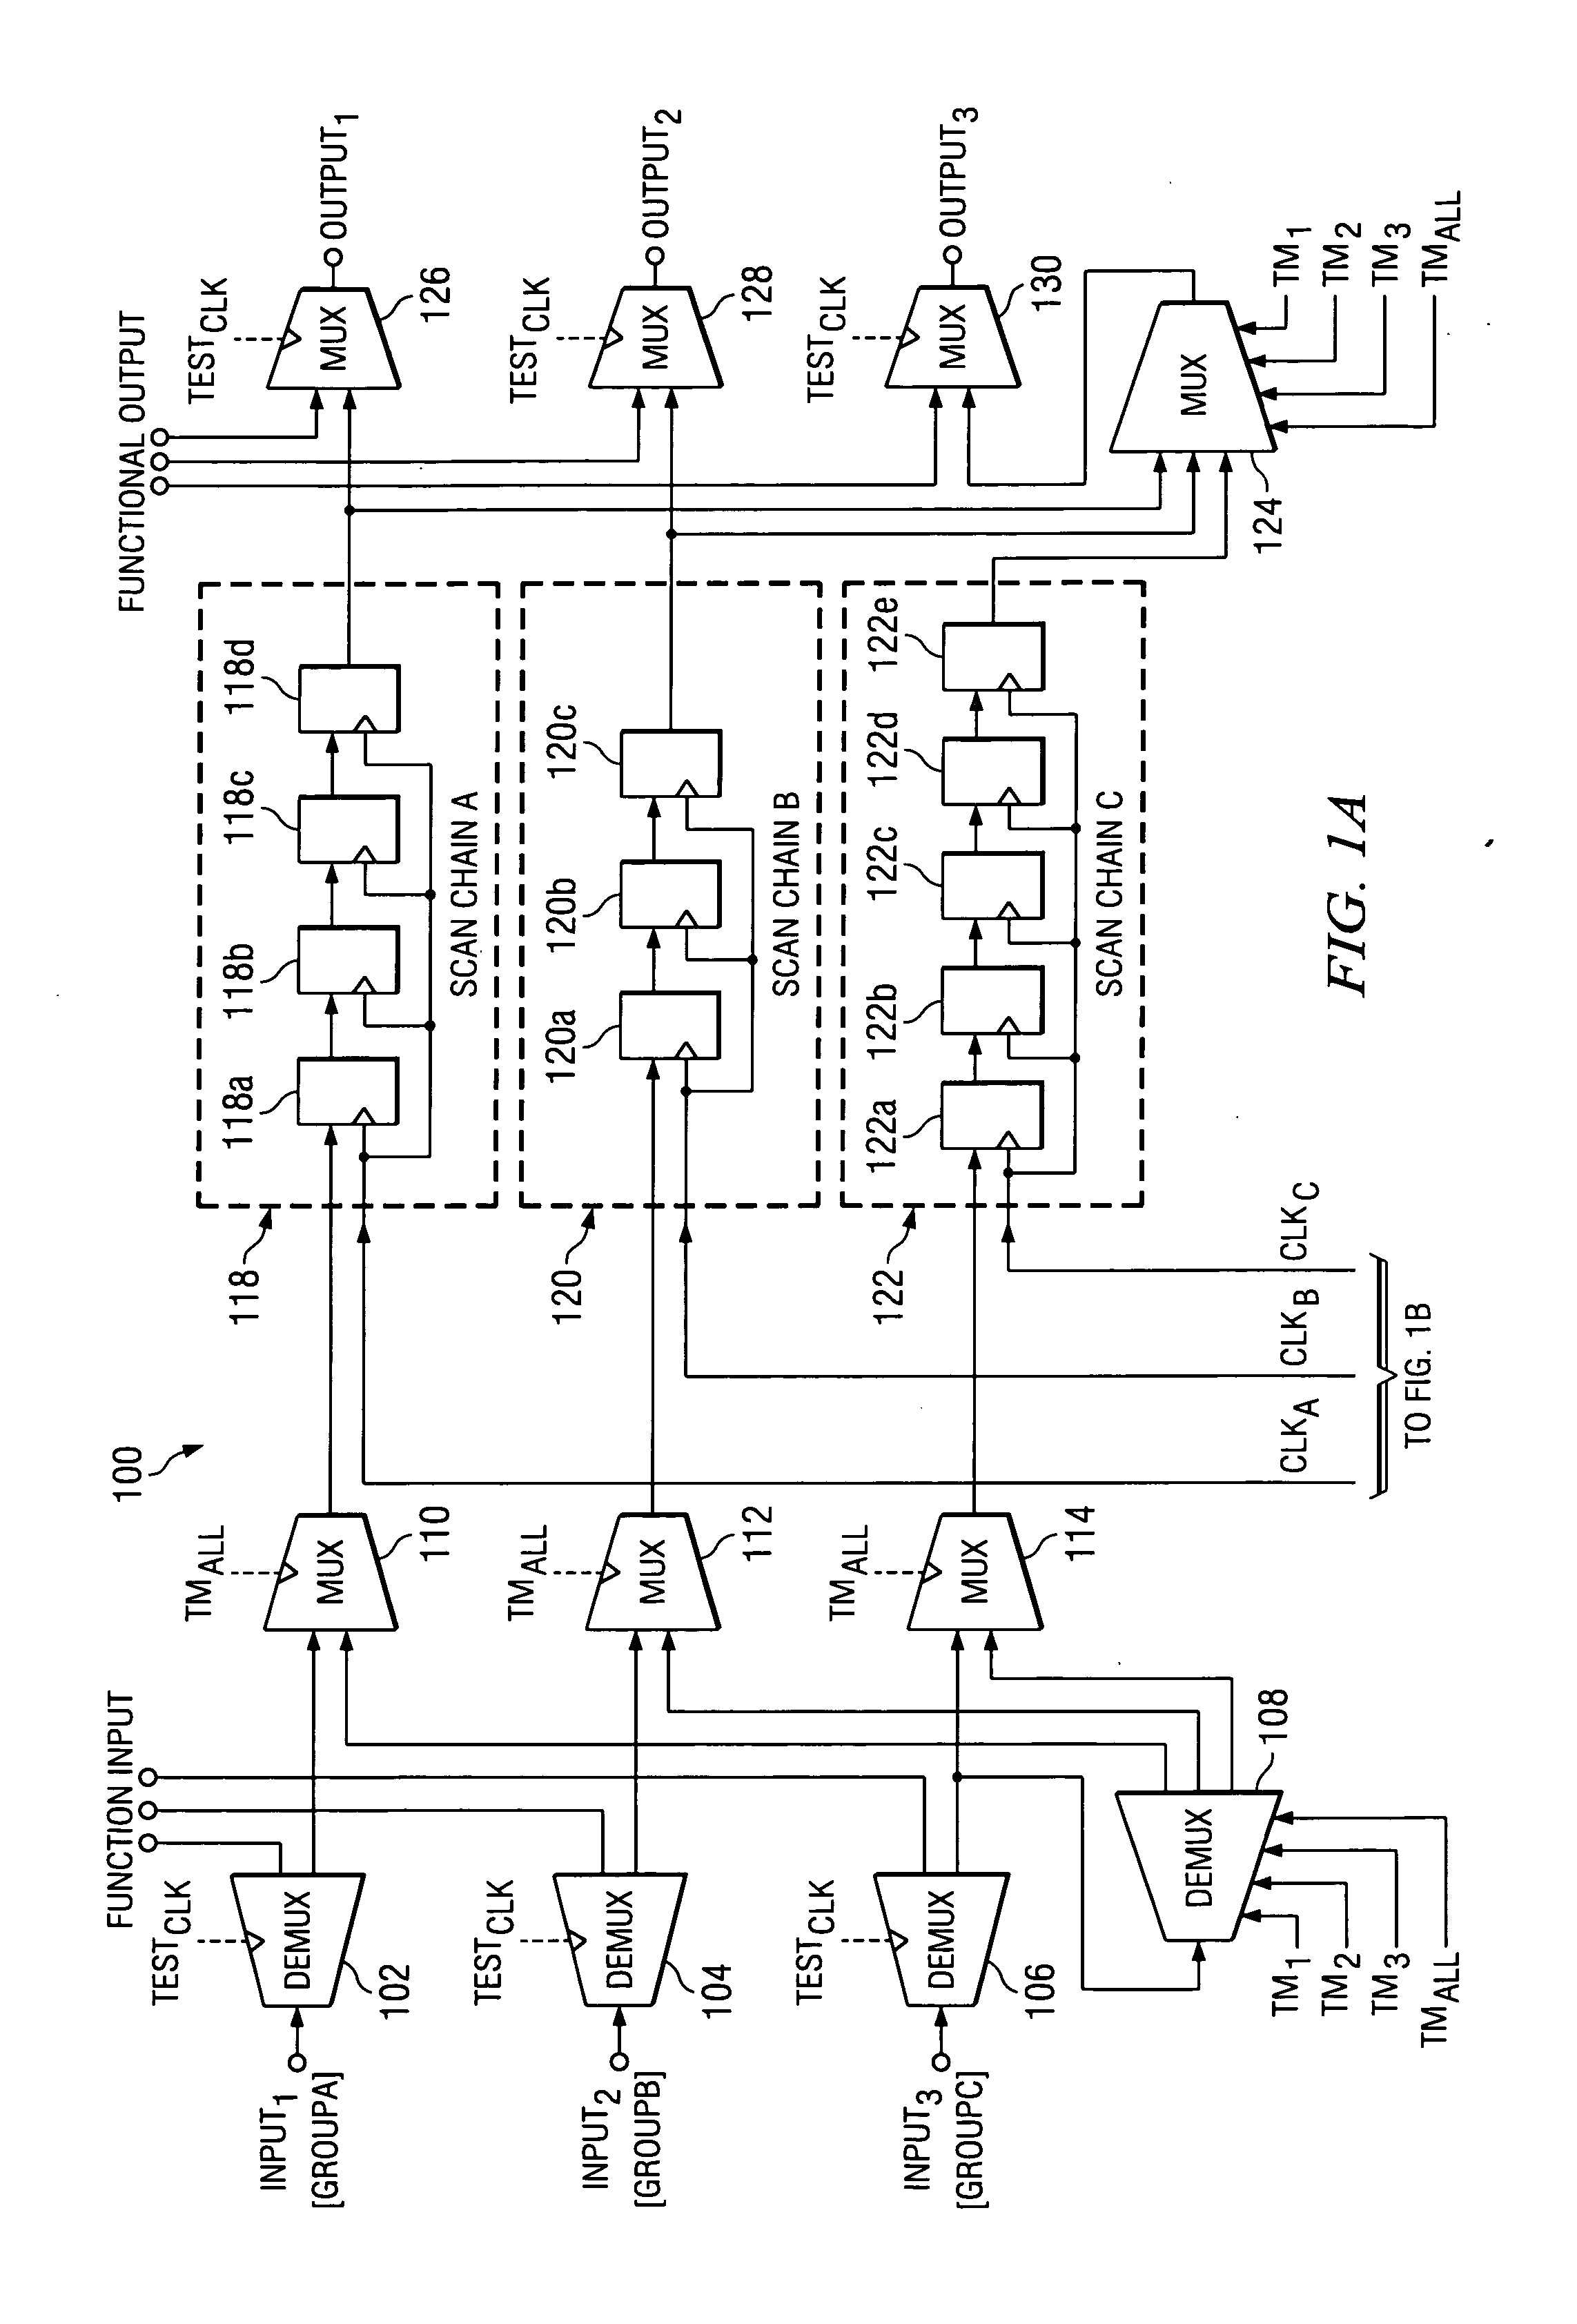 At-speed ATPG testing and apparatus for SoC designs having multiple clock domain using a VLCT test platform